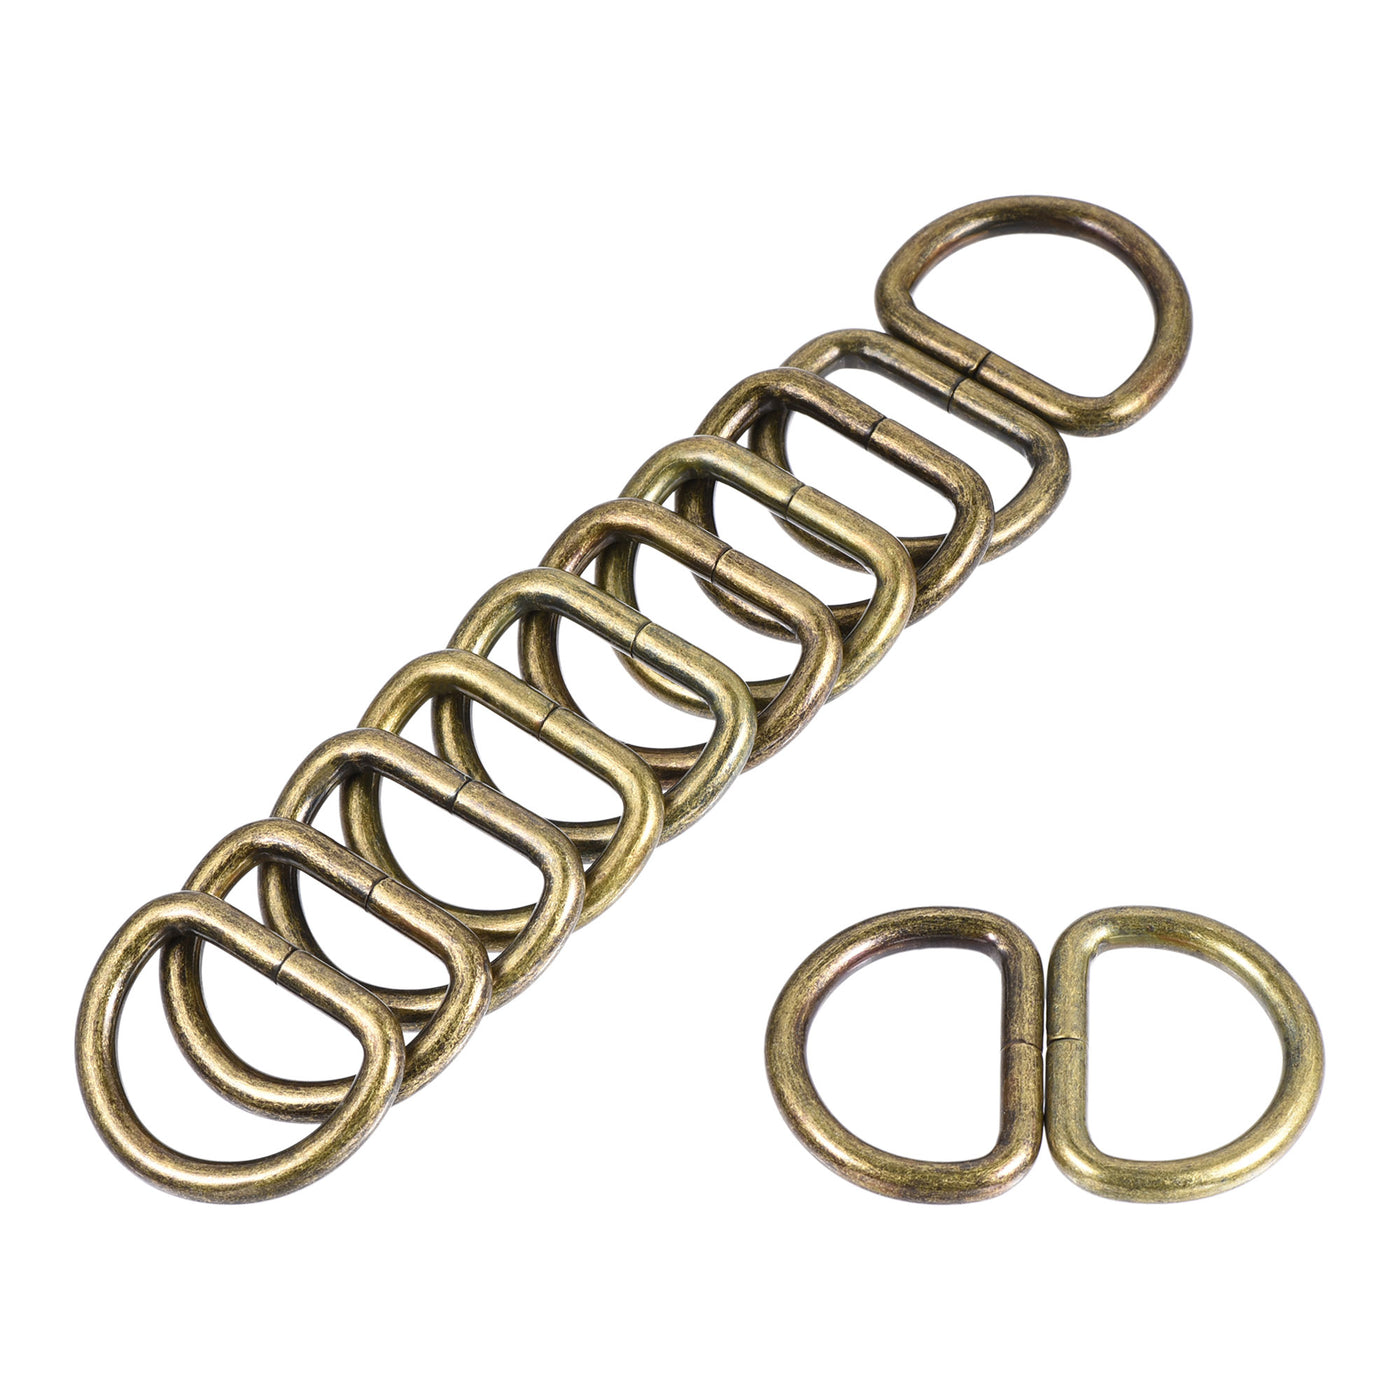 uxcell Uxcell Metal D Ring 0.98"(25mm) D-Rings Buckle for Hardware Bags Belts Craft DIY Accessories Bronze Tone 12pcs